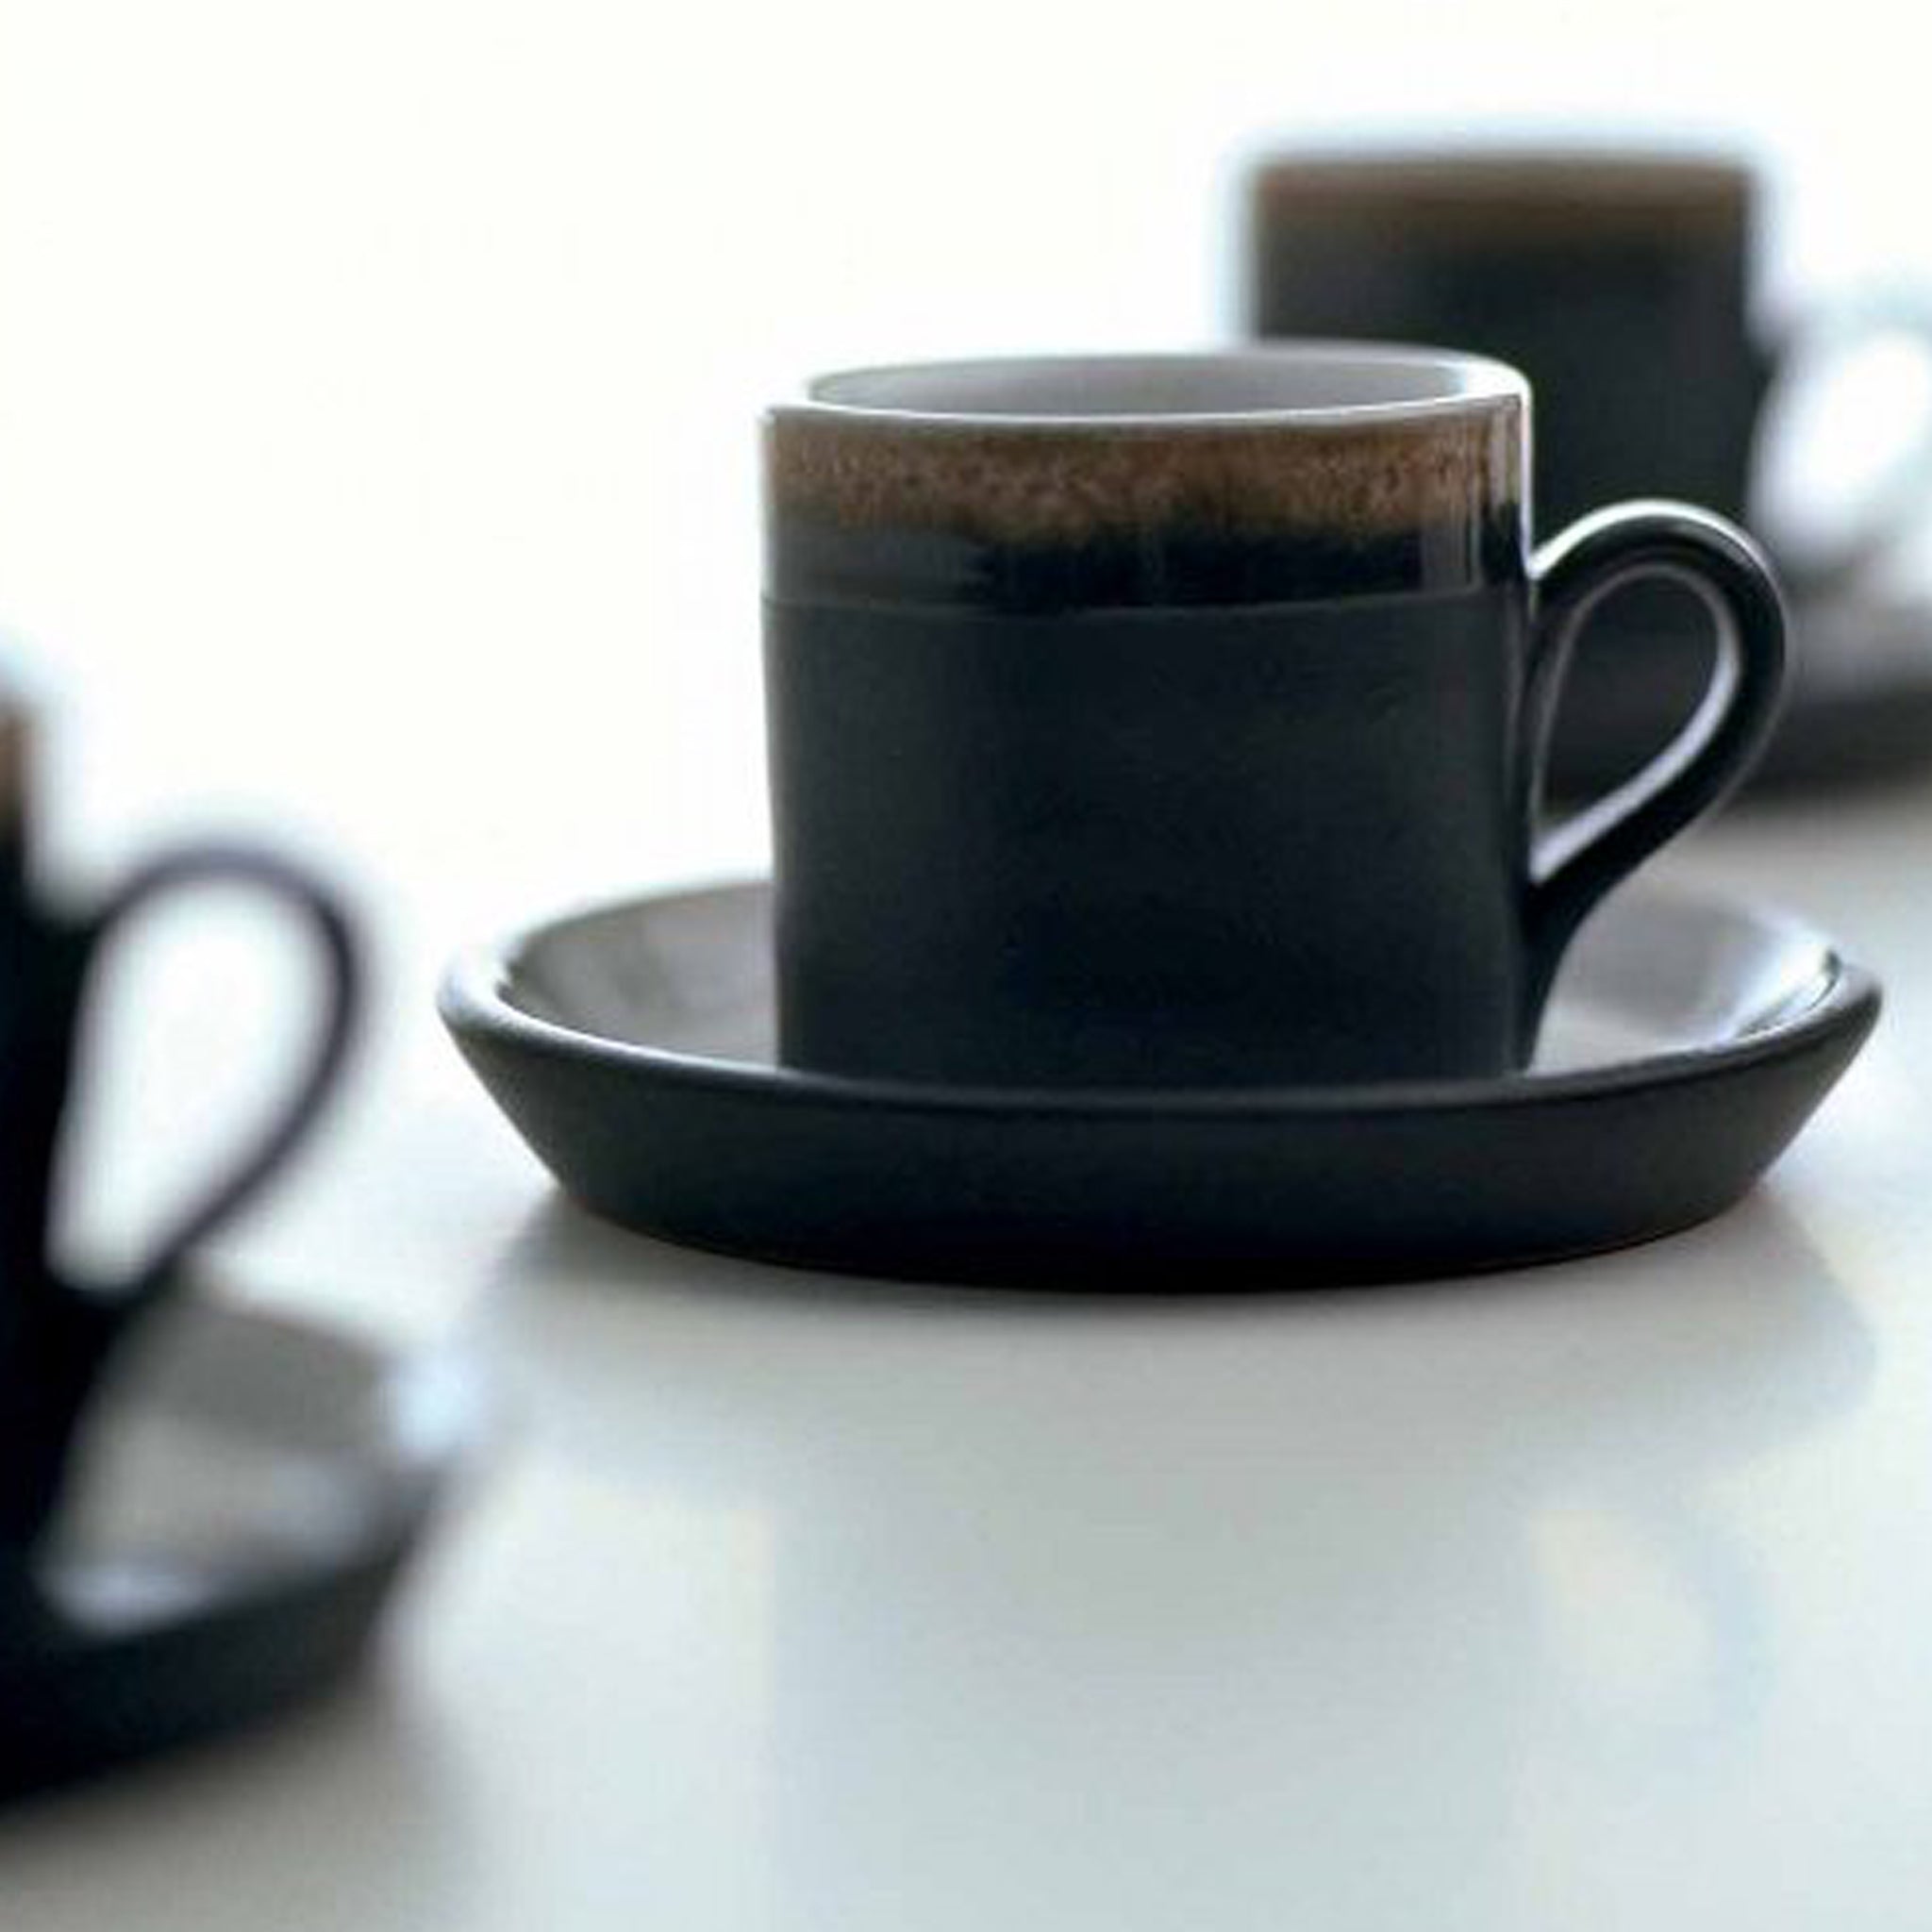 Shanagarry Coffee Cup and Saucer